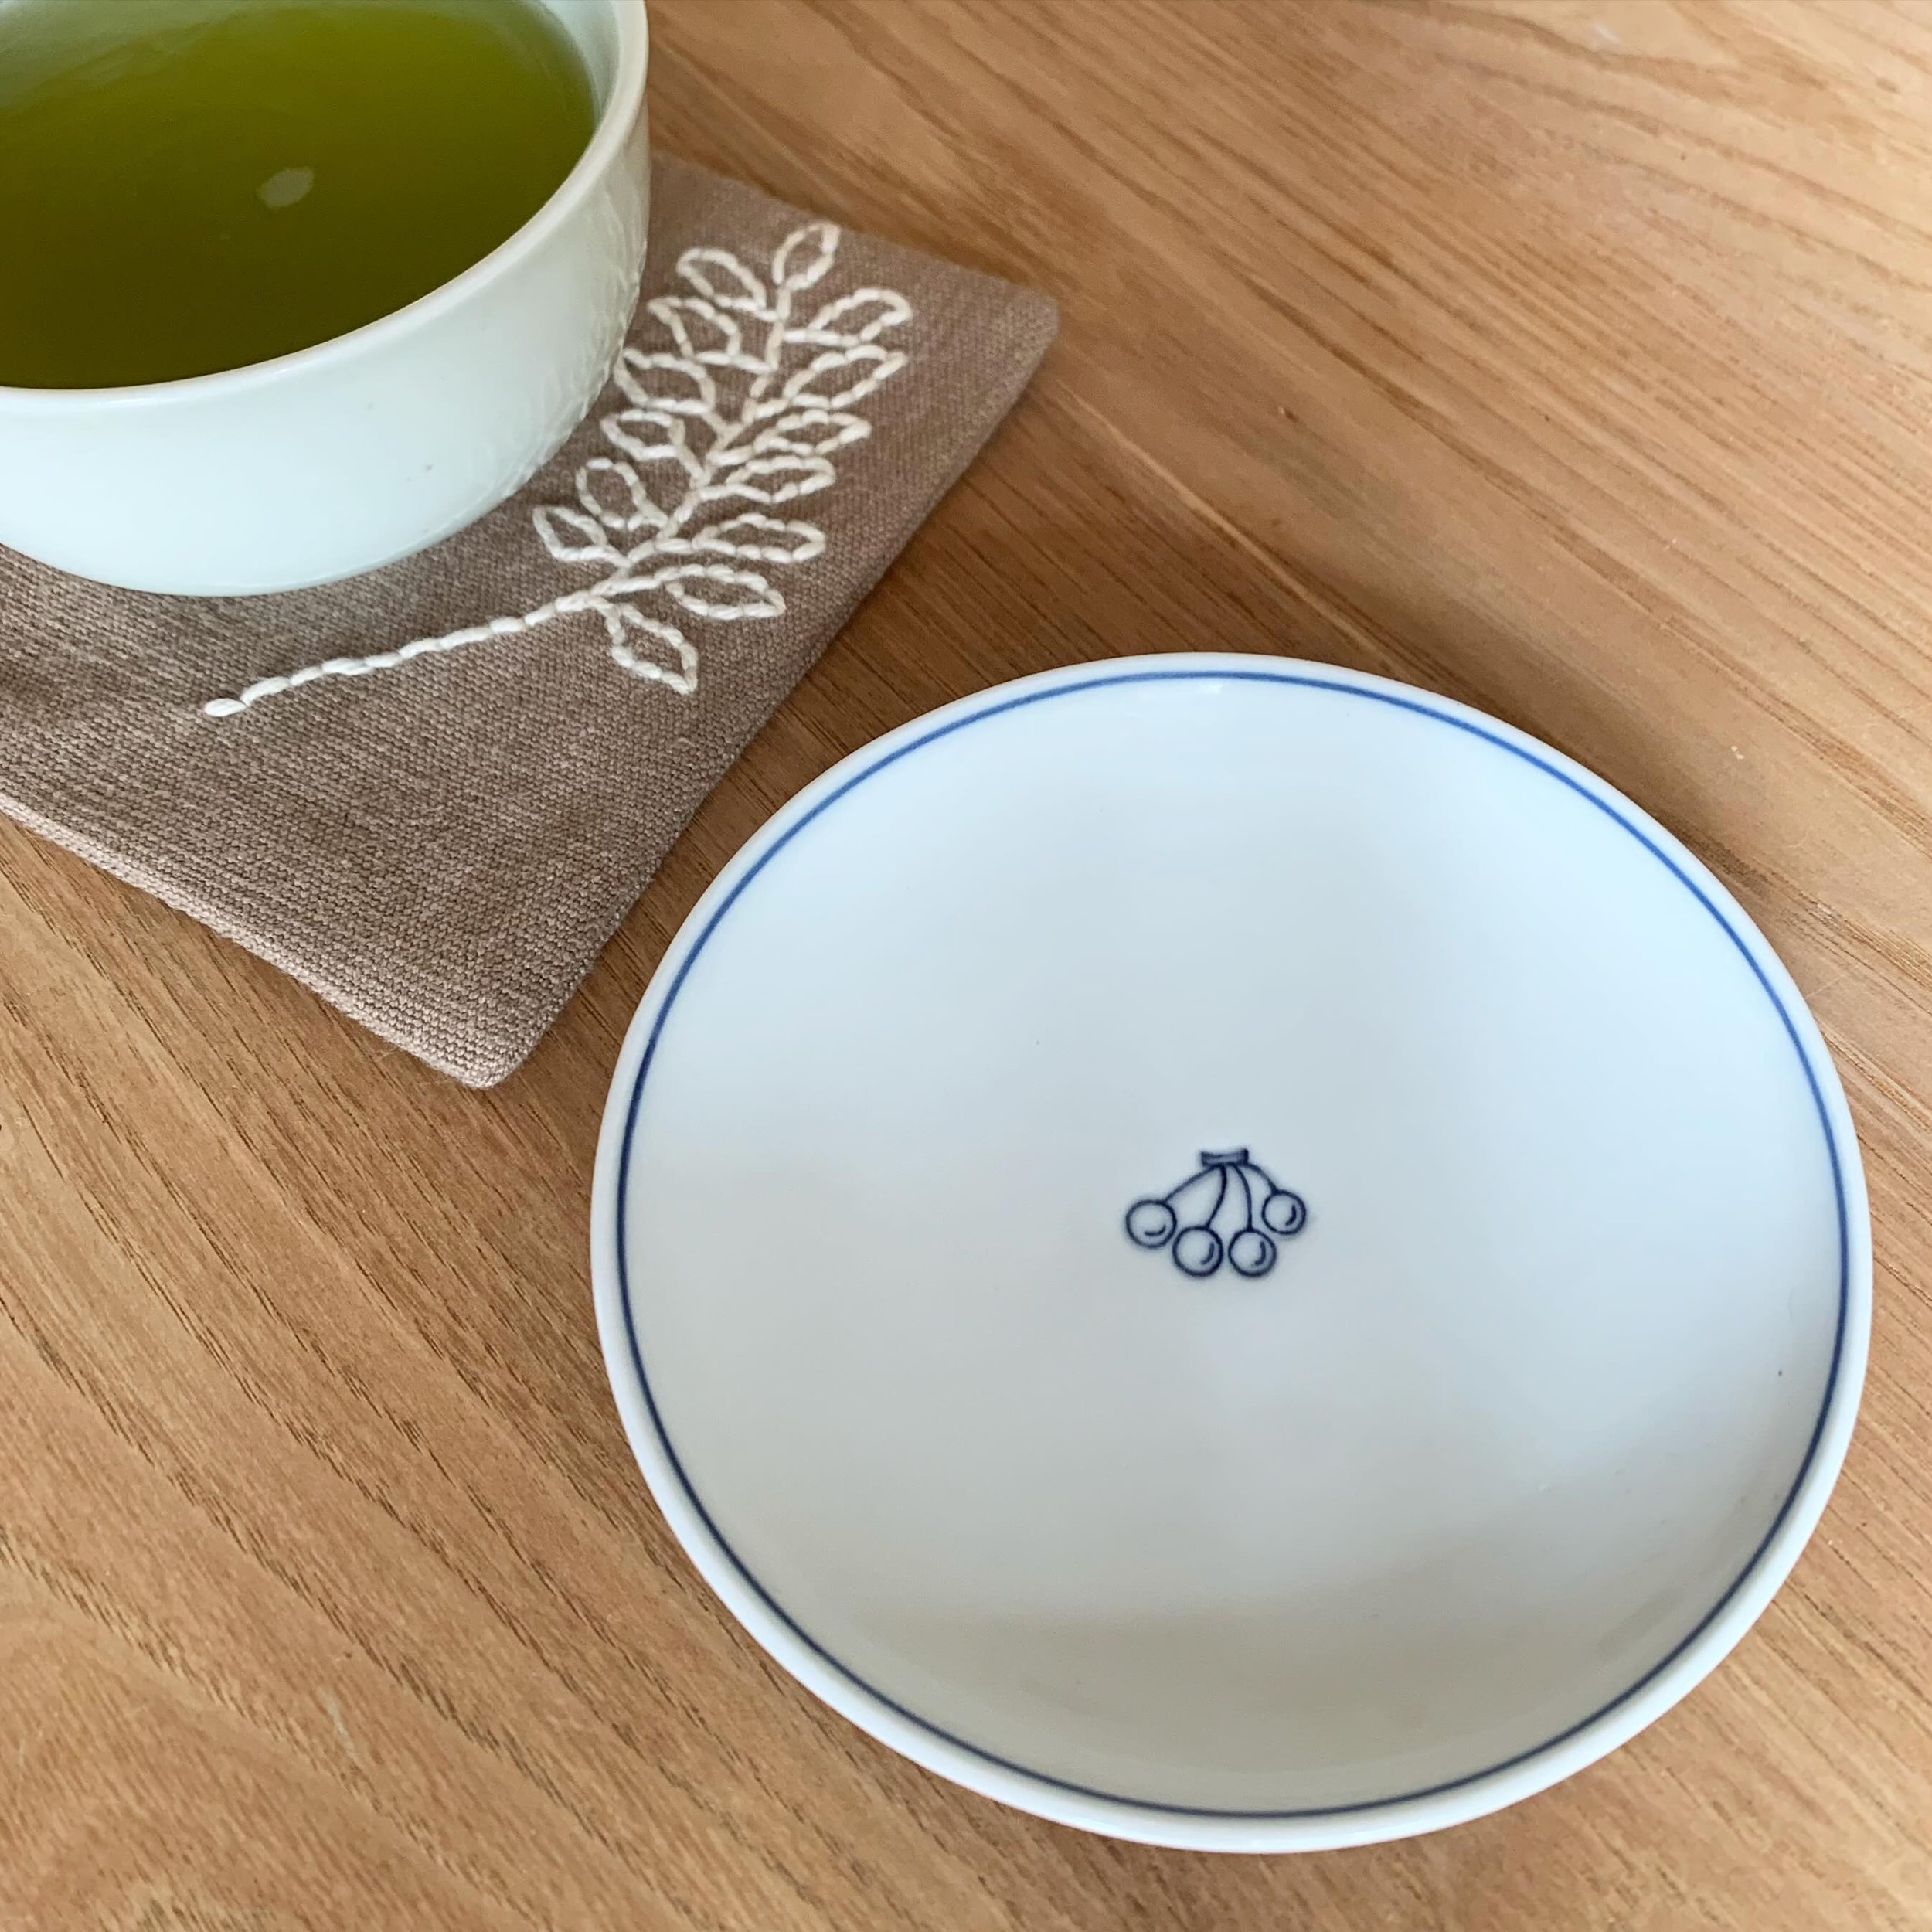 The cherry on top🍒

Beautiful small indigo kutani plate with cherries.
The plate is modeled after an ancient five-inch plate from kutani and fired in a Kutani kiln - renowned for producing porcelain since the Edo period.

The stamp is based on antiq